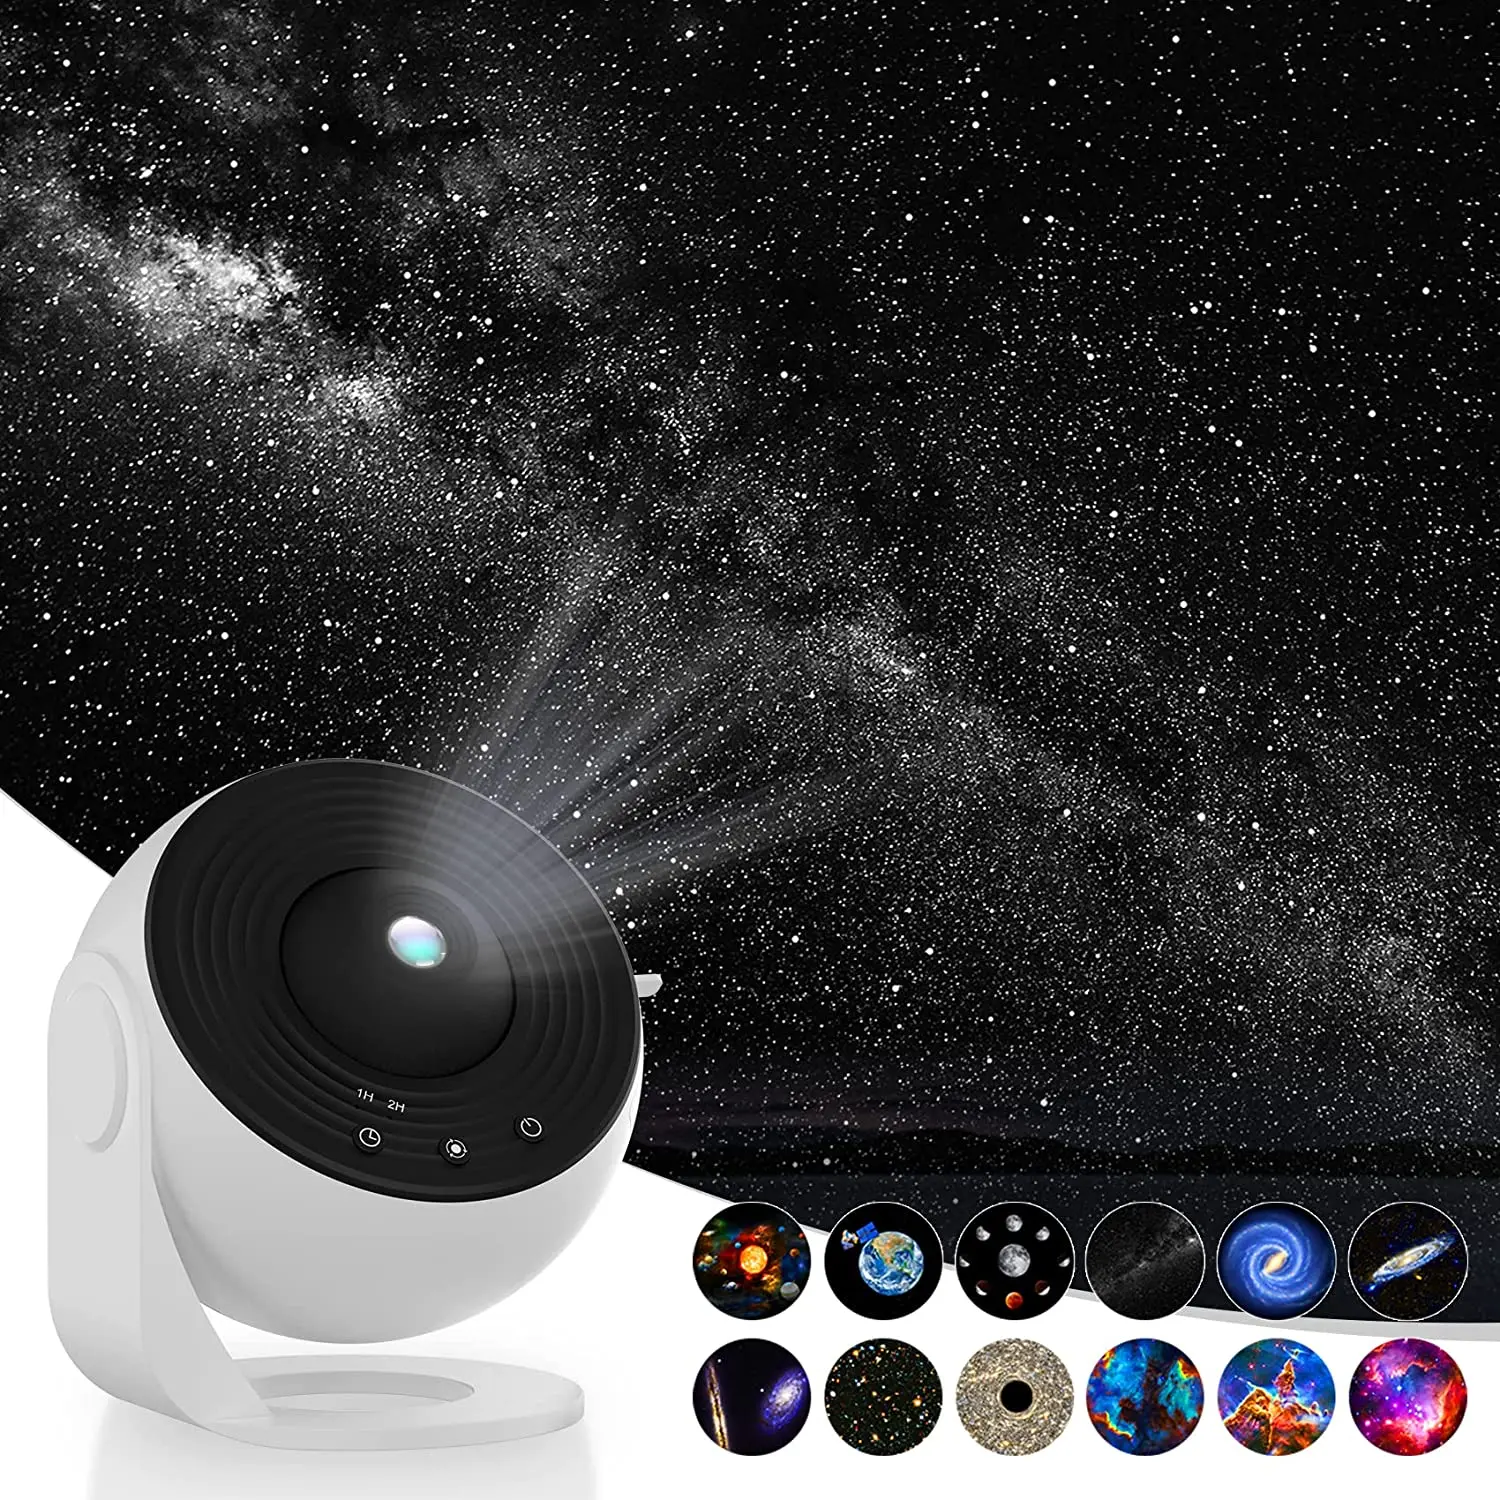 NEW 12 In 1 Planetarium Galaxy Starry Sky Projector Night Light HD Star Aurora Projection Lamp For Kids Bedroom Home Party Decor